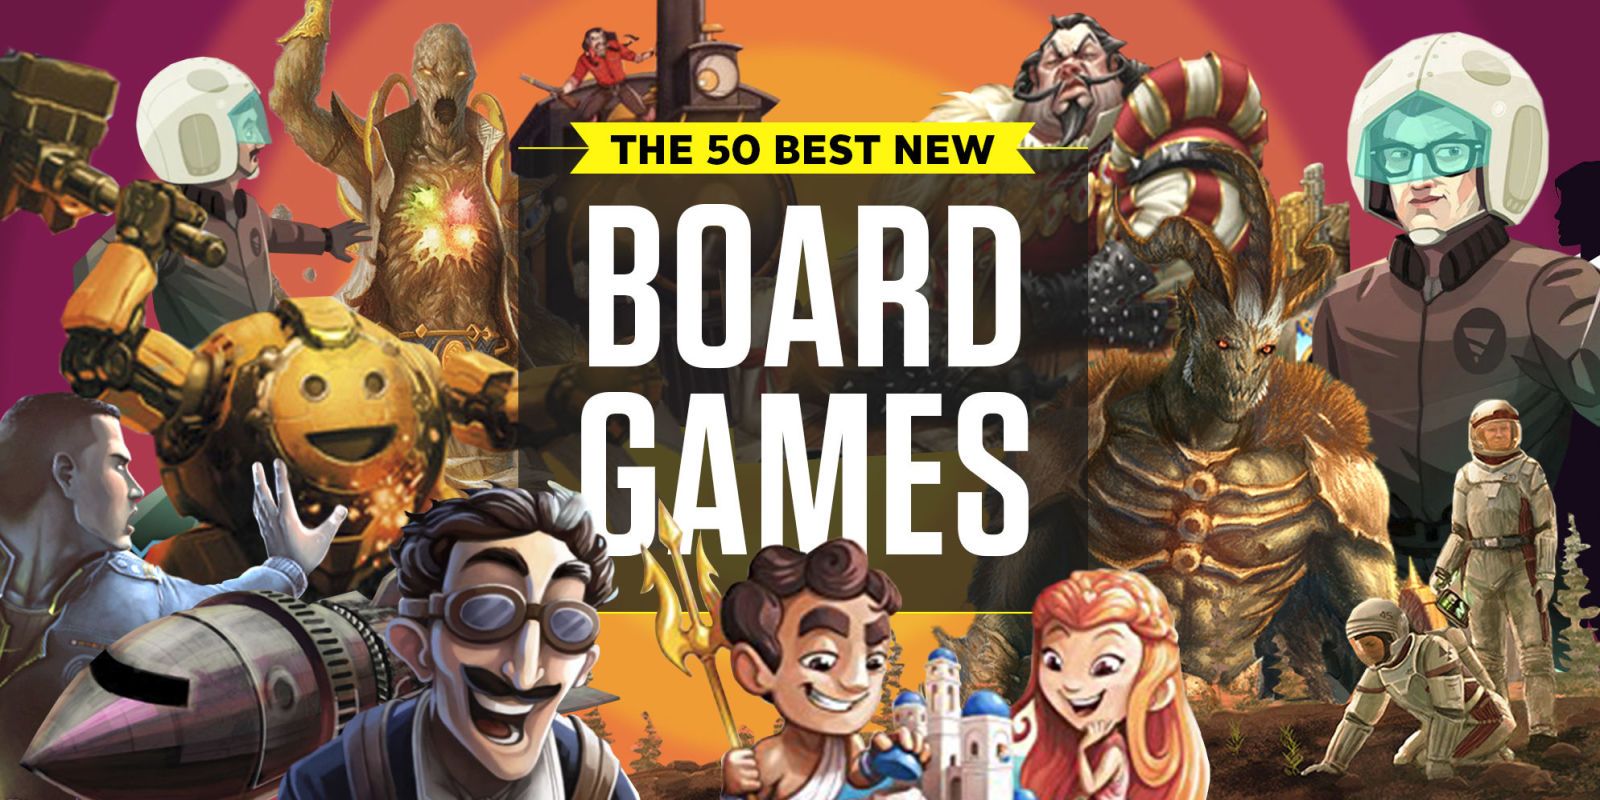 Top Rated Adult Board Games